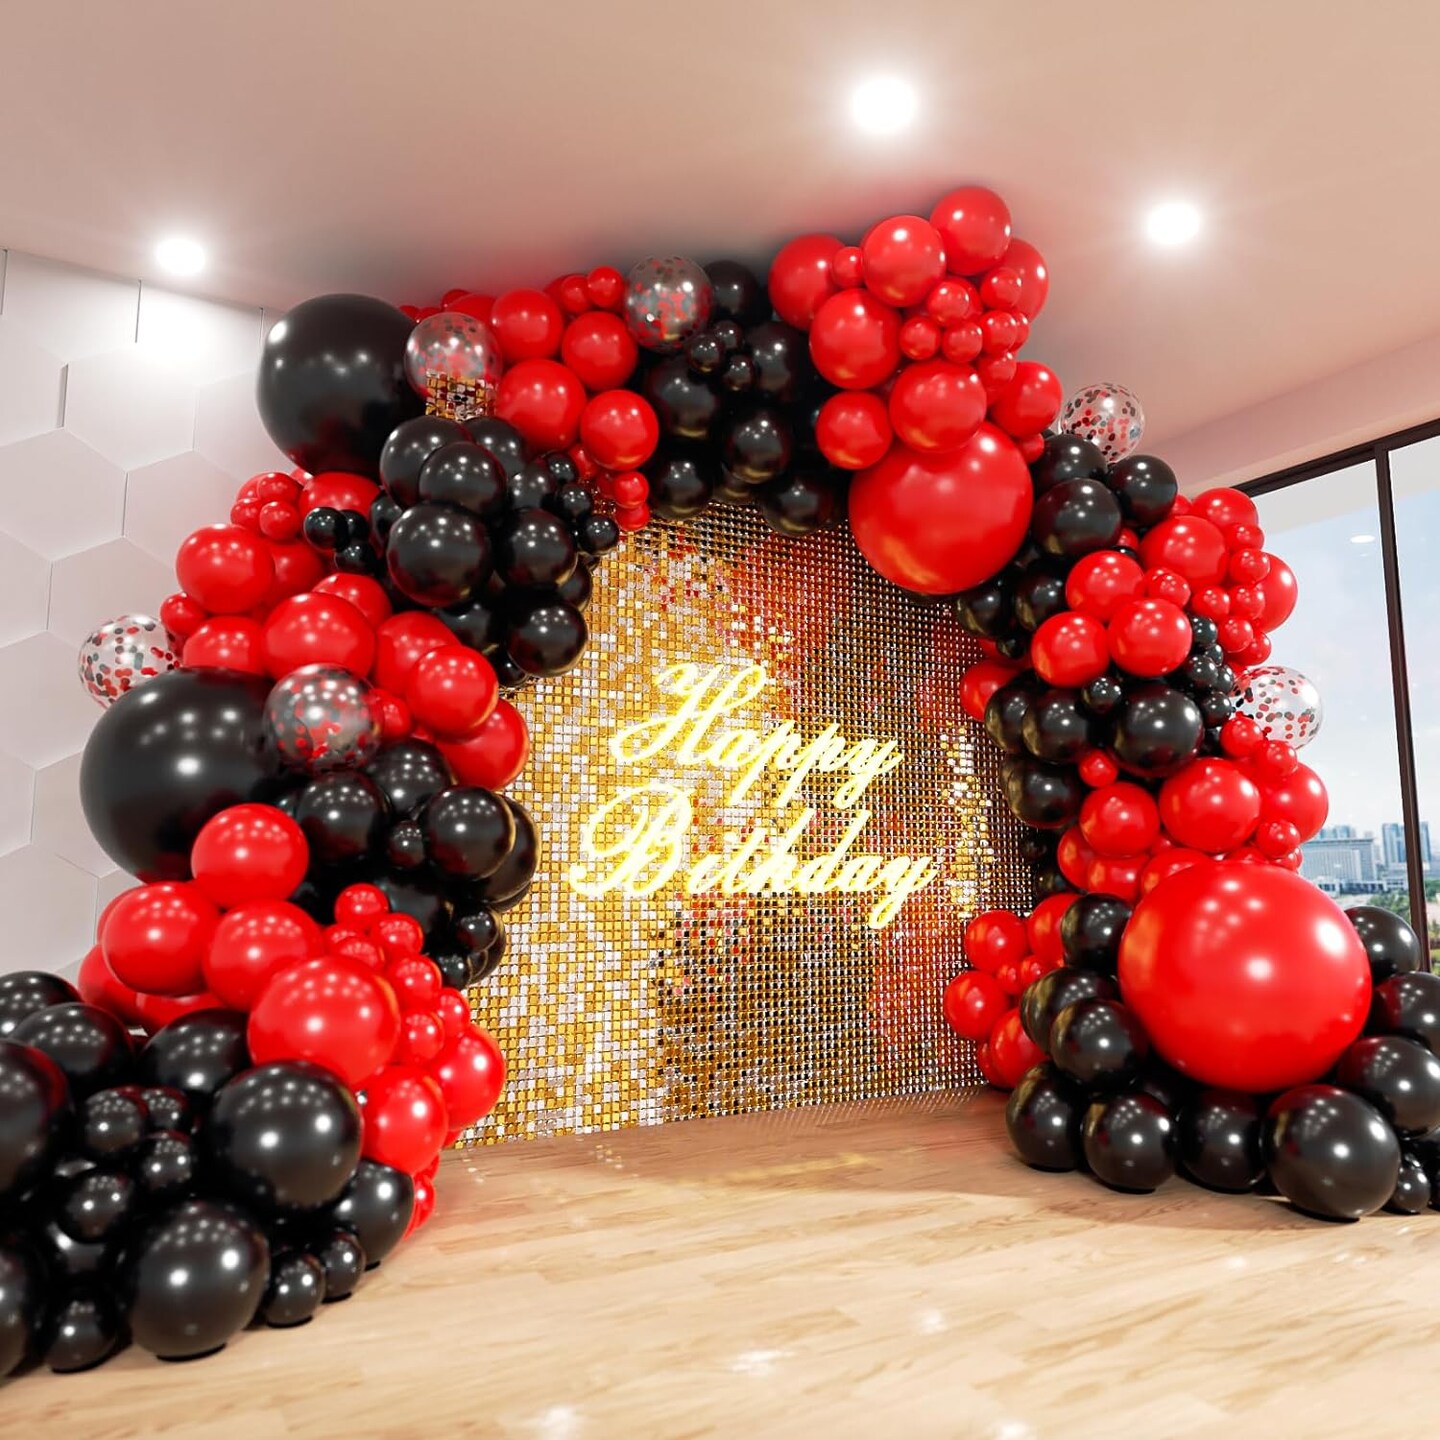 Red and Black Balloon Arch Kit, 140Pcs Different Sizes inch Black and Red Balloons and Confetti Party Balloon Garland Kit for Birthday, Wedding, Graduation, Anniversary, Prom Decorations